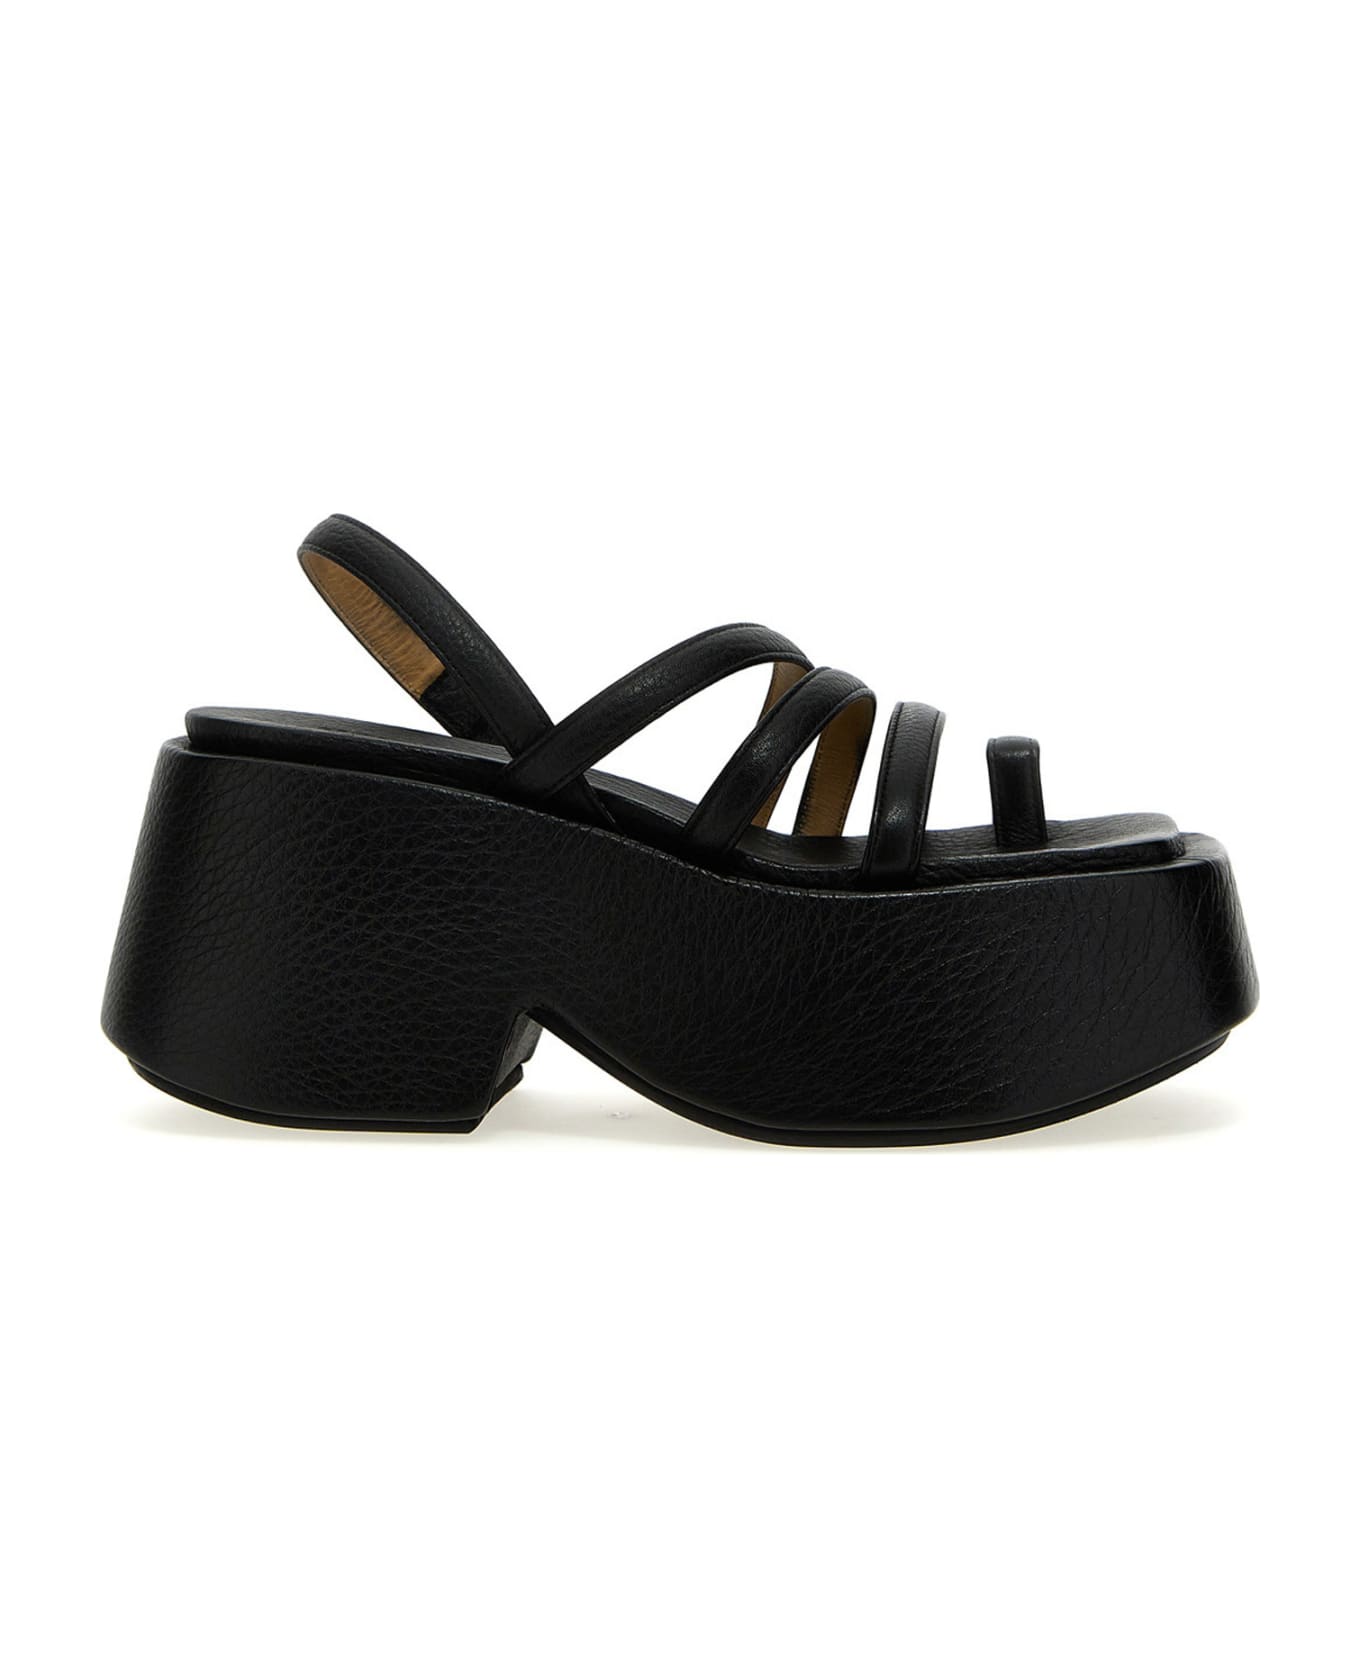 Marsell 'zeppo' This - Black  